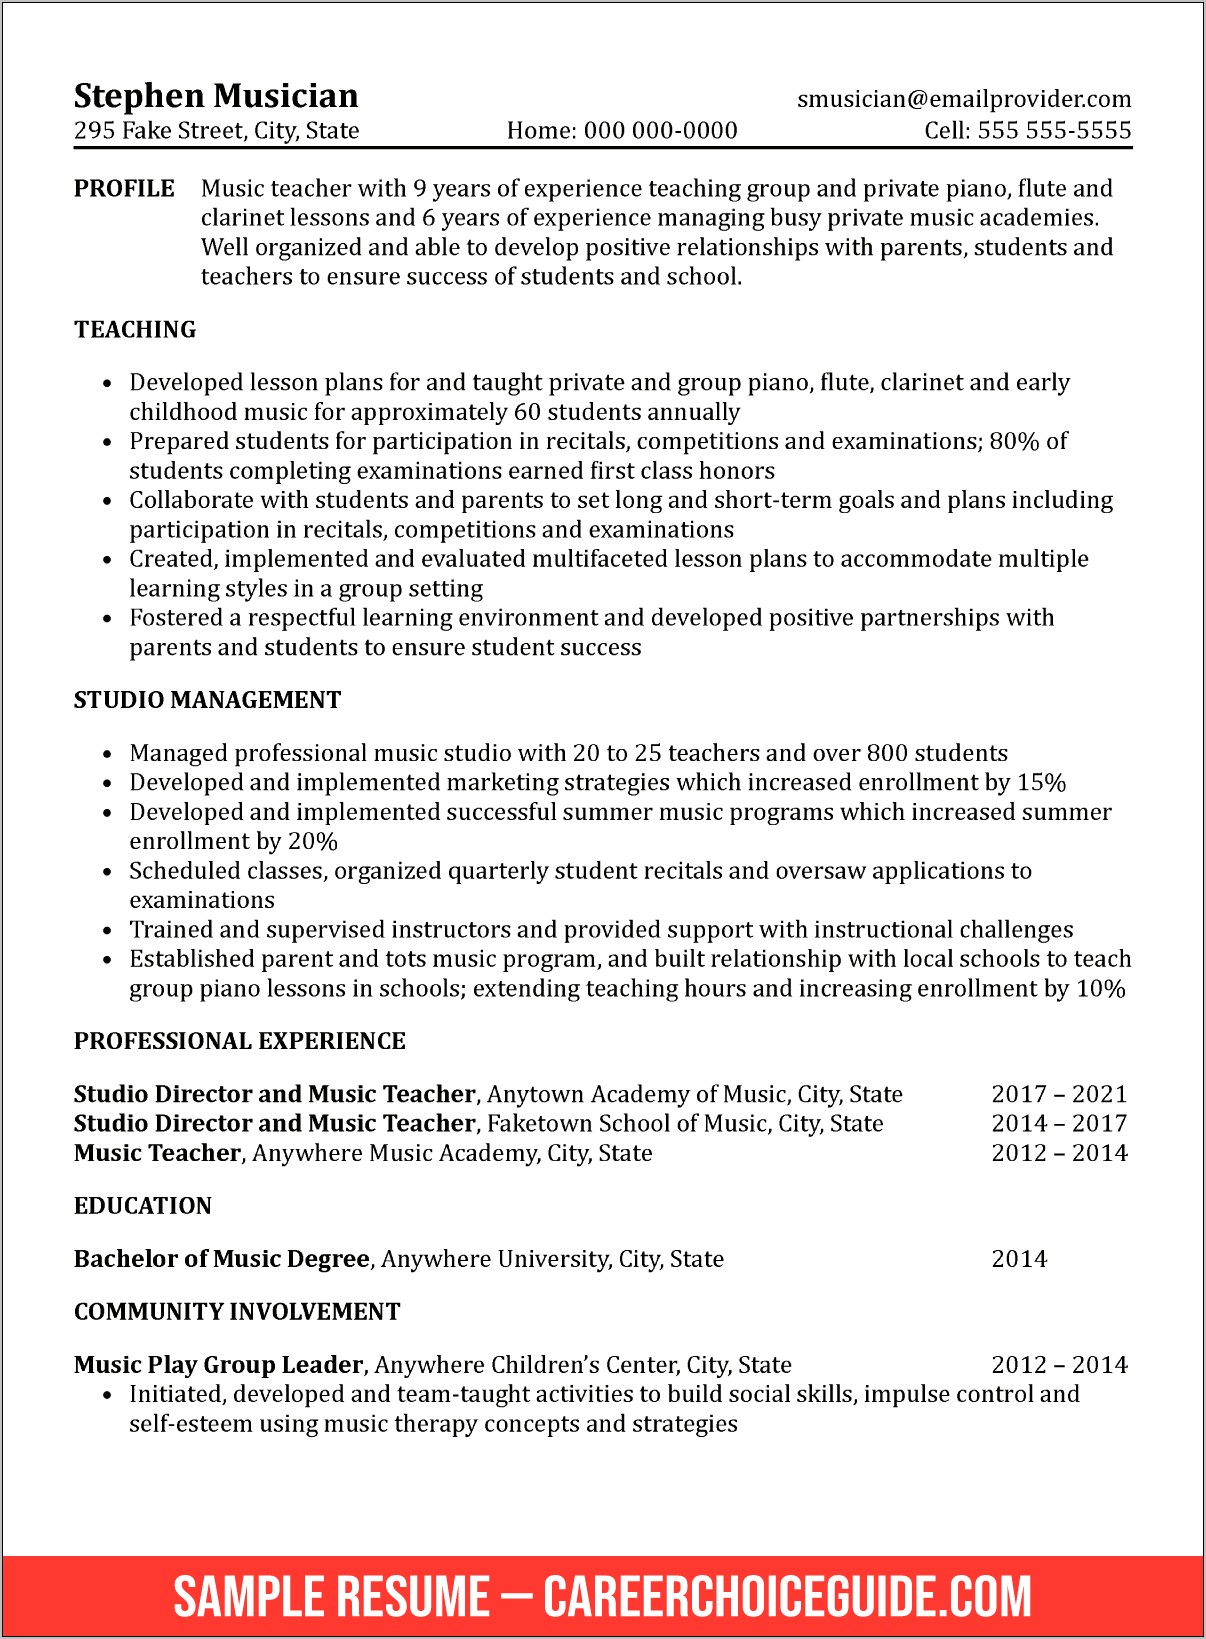 Examples Of Music Education Resumes